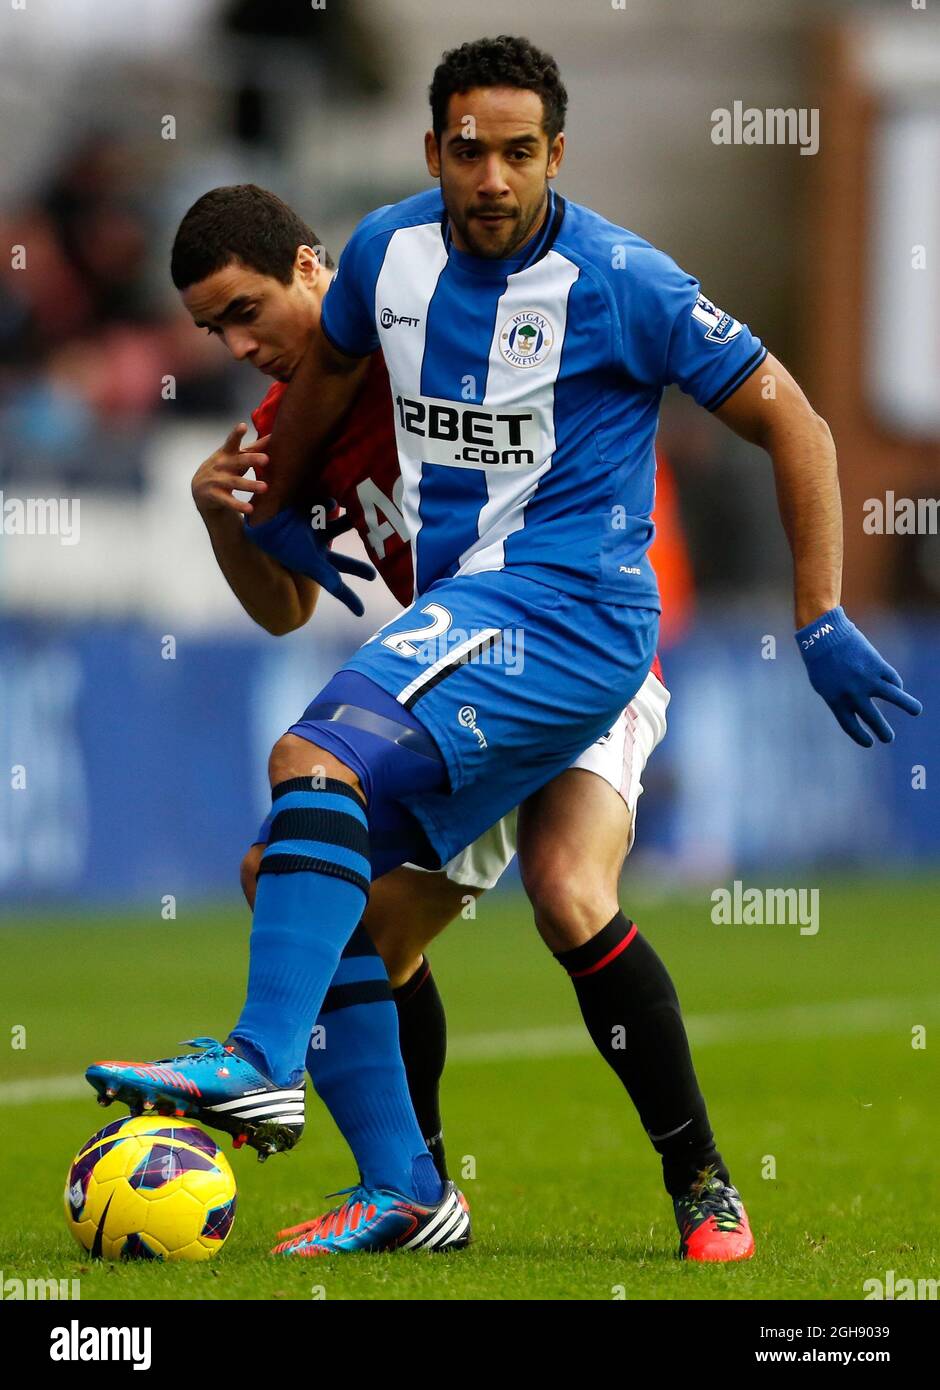 Jean Beausejour of Wigan Athletic in action with Rafael of Manchester United during the Barclays Premier League between Wigan Athletic and Manchester United at the DW Stadium in Wigan, England on January 01, 2013. Stock Photo